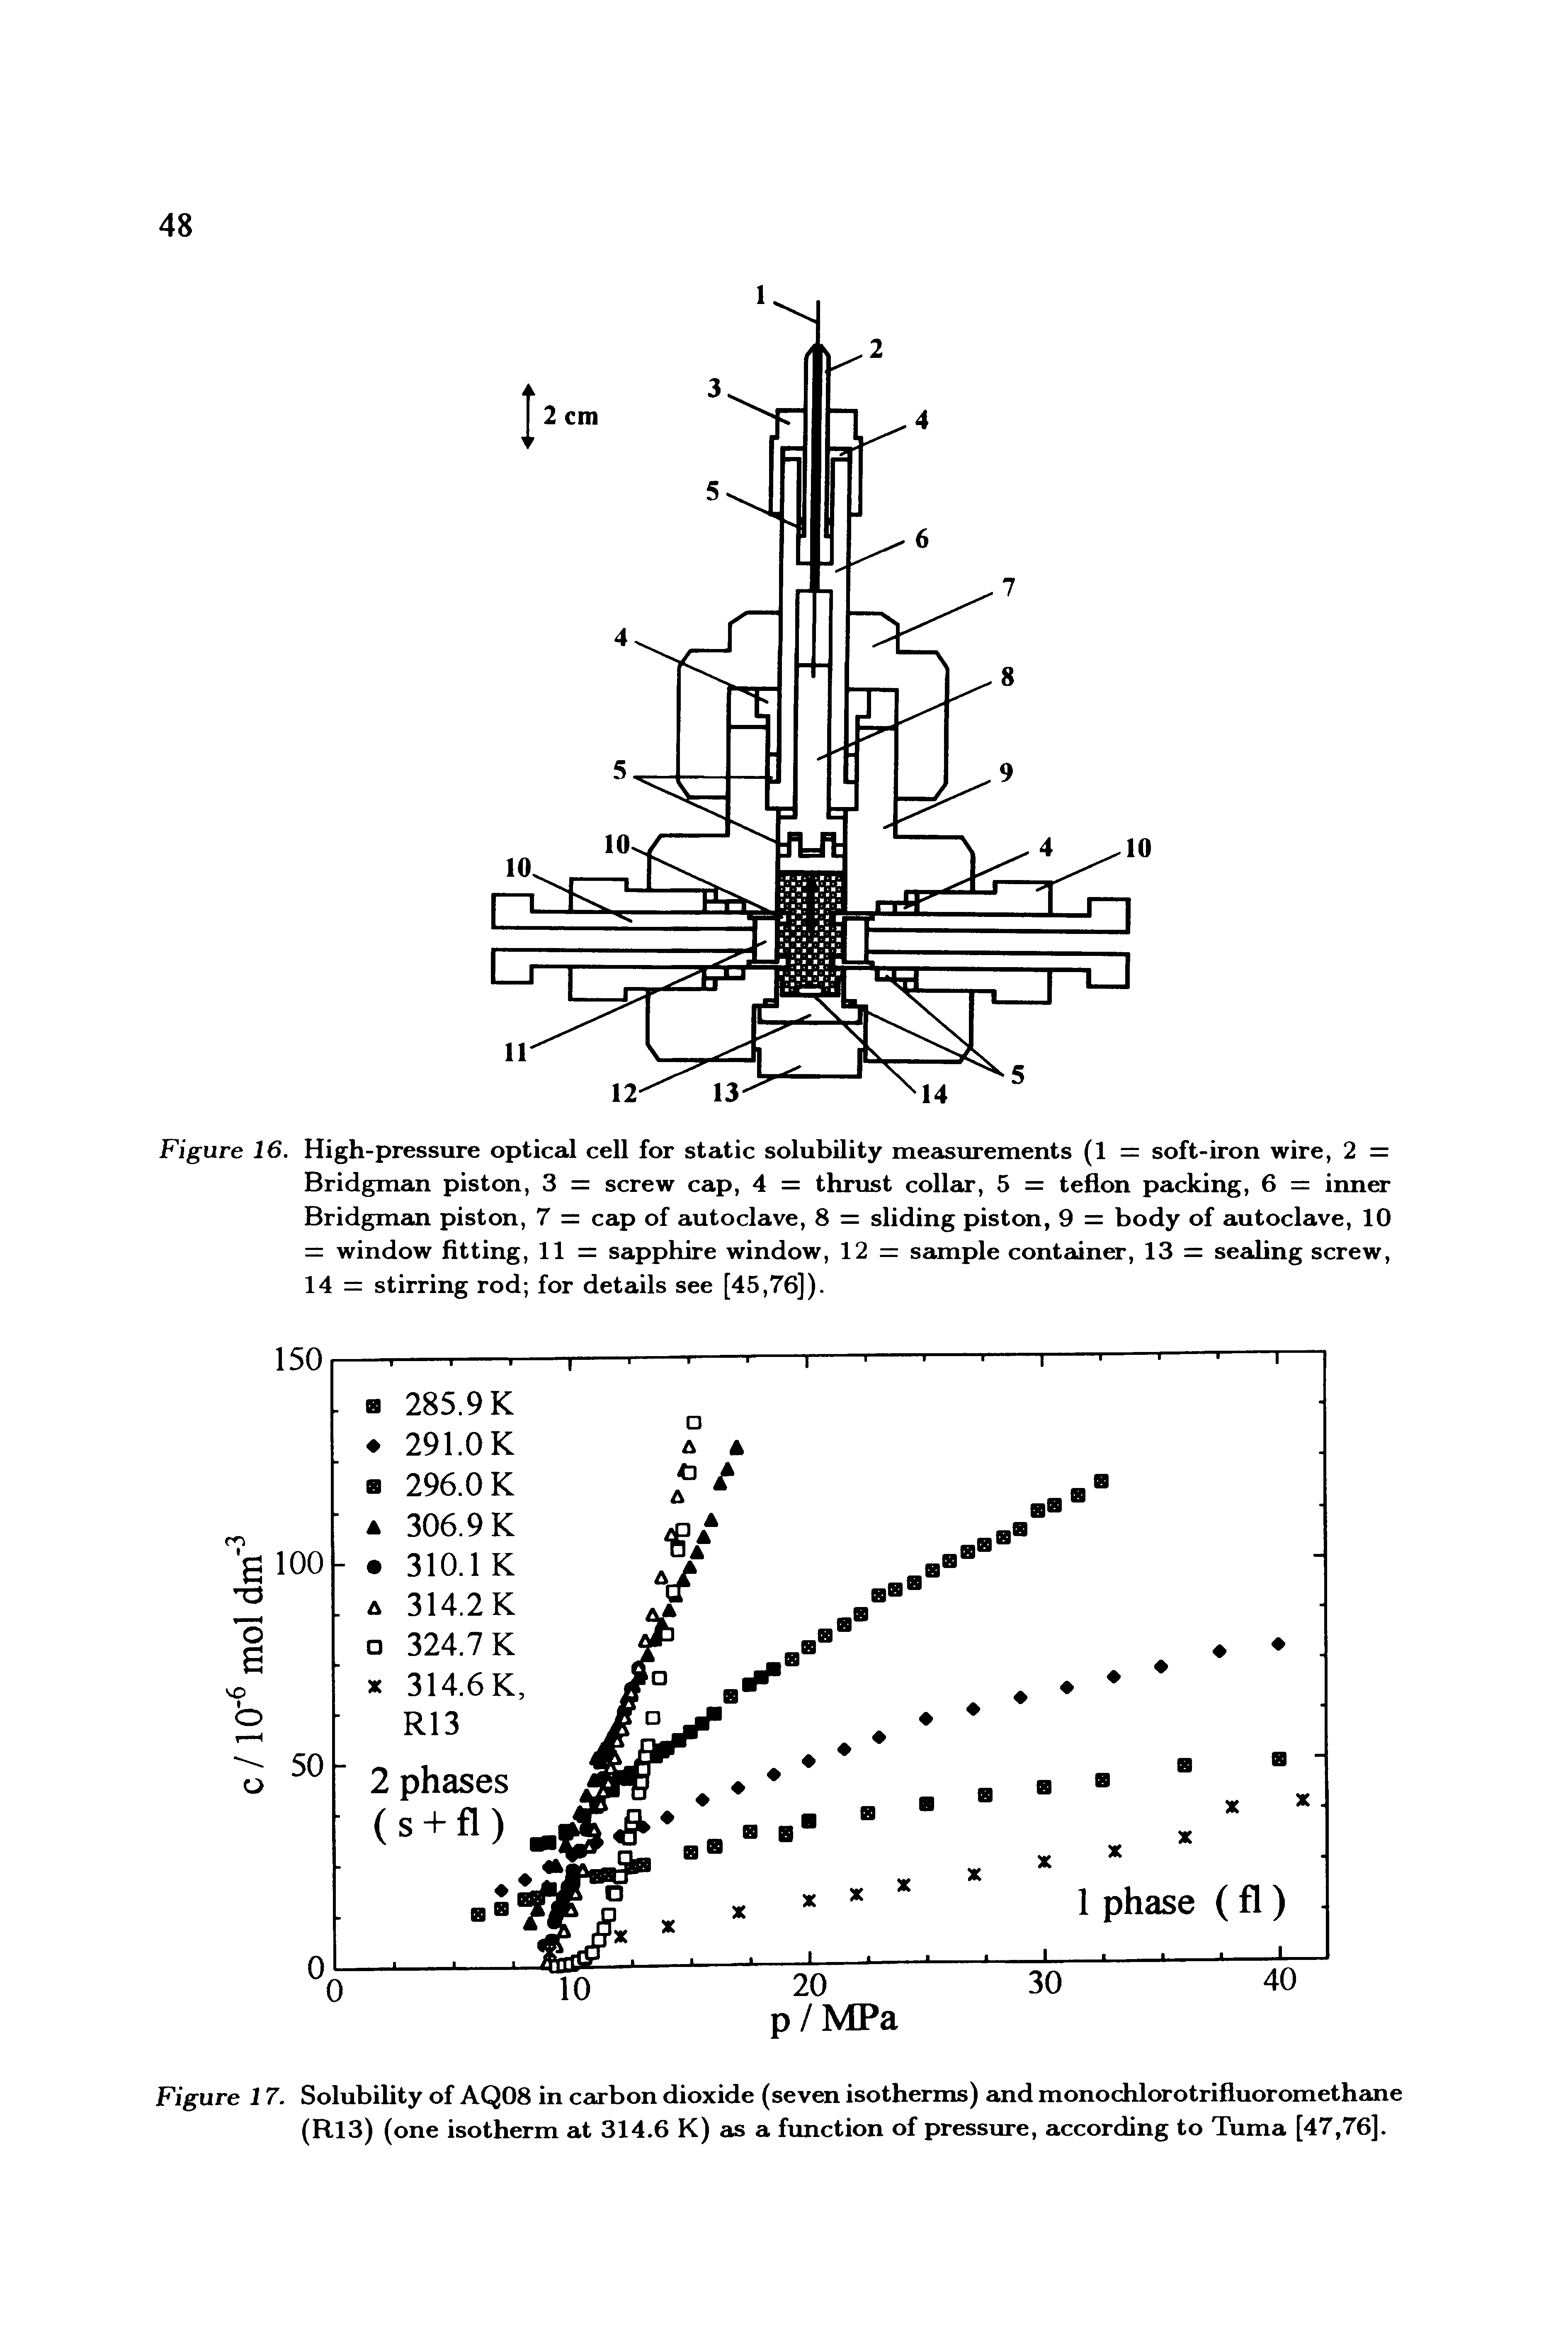 Figure 16. High-pressure optical cell for static solubility measurements (1 = soft-iron wire, 2 = Bridgman piston, 3 = screw cap, 4 = thrust collar, 5 = teflon packing, 6 = inner Bridgman piston, 7 = cap of autoclave, 8 = sliding piston, 9 = body of autoclave, 10 = window fitting, 11 = sapphire window, 12 = sample container, 13 = sealing screw, 14 = stirring rod for details see [45,76]).